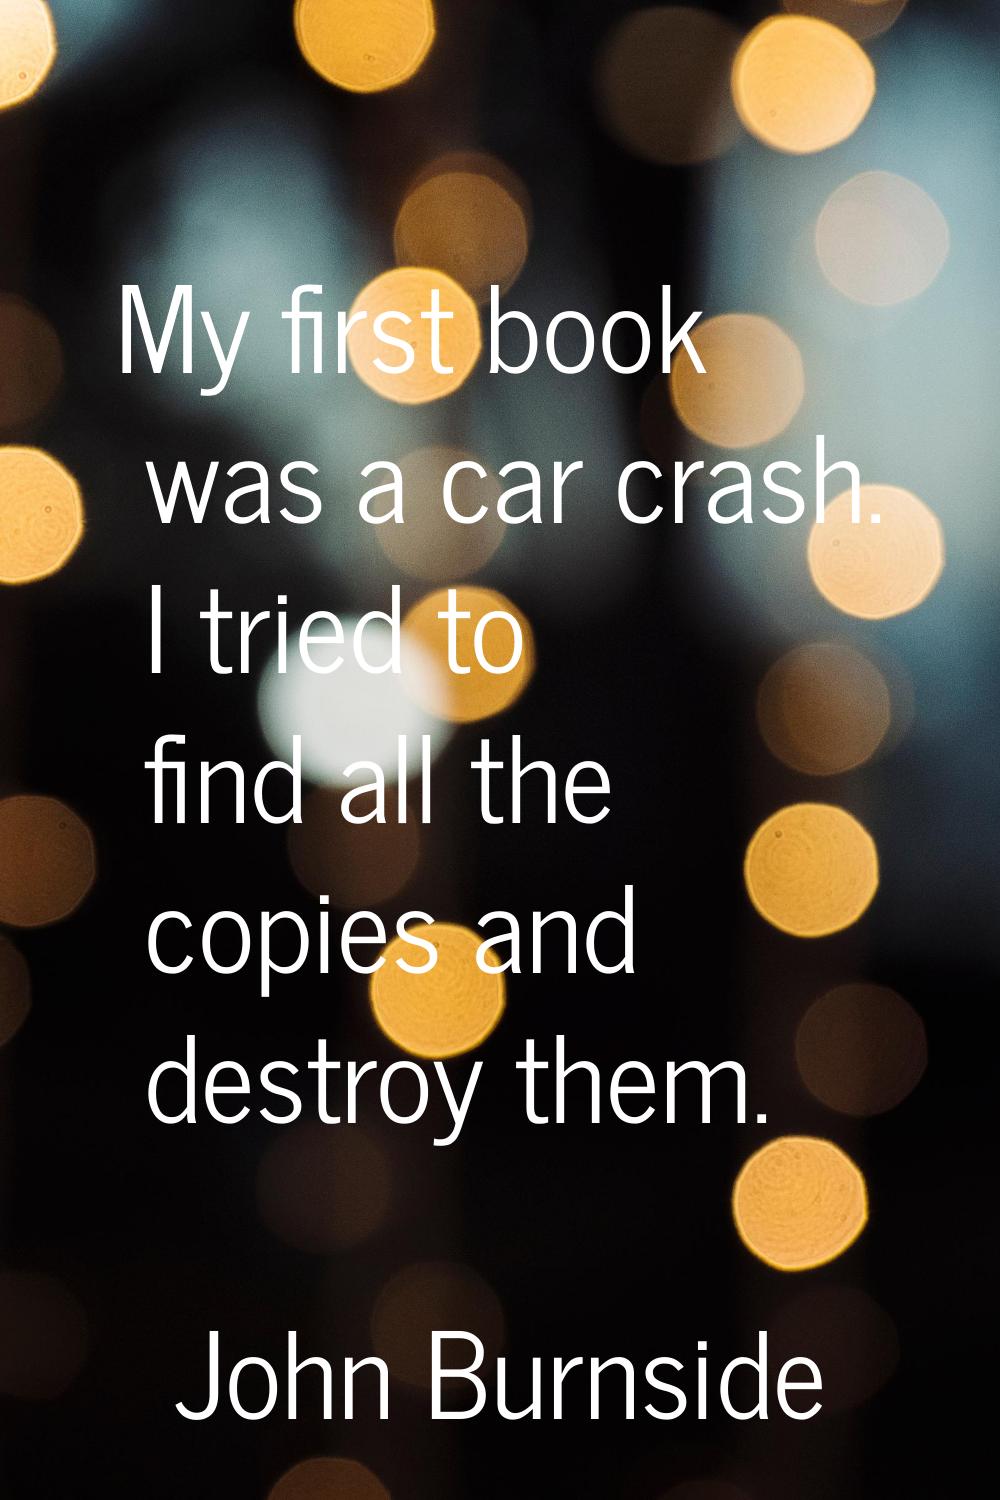 My first book was a car crash. I tried to find all the copies and destroy them.